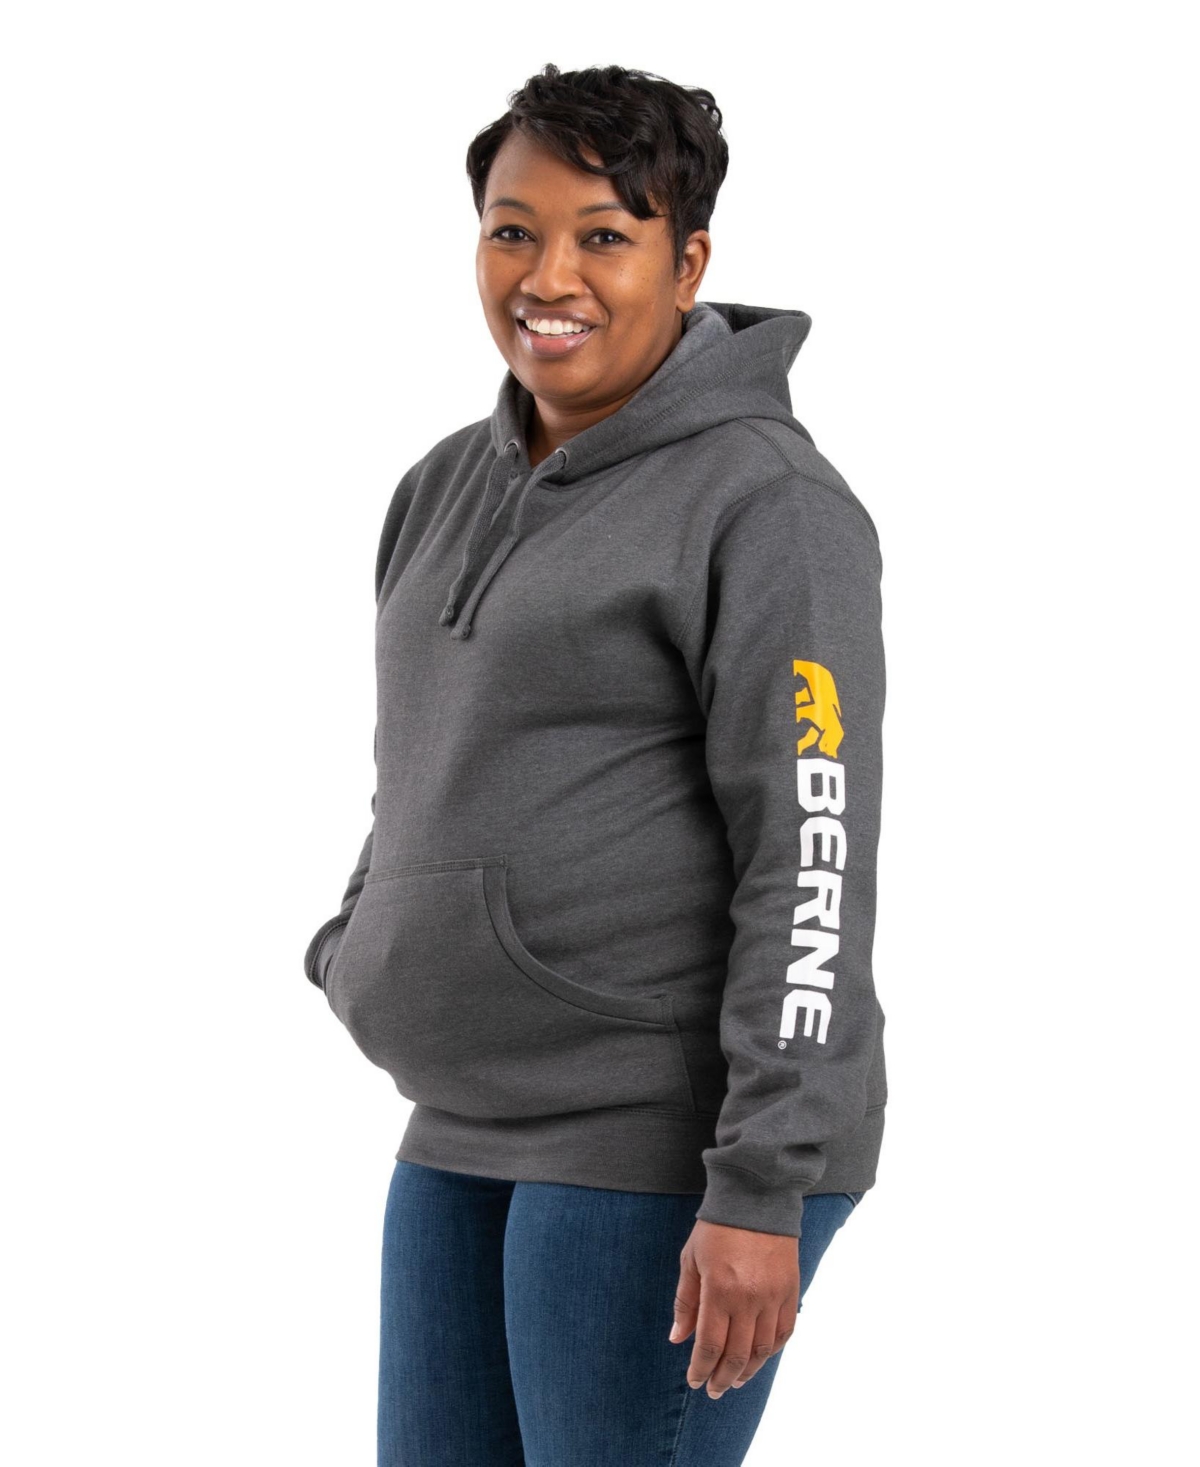 Women's Signature Sleeve Hooded Pullover - Graphite